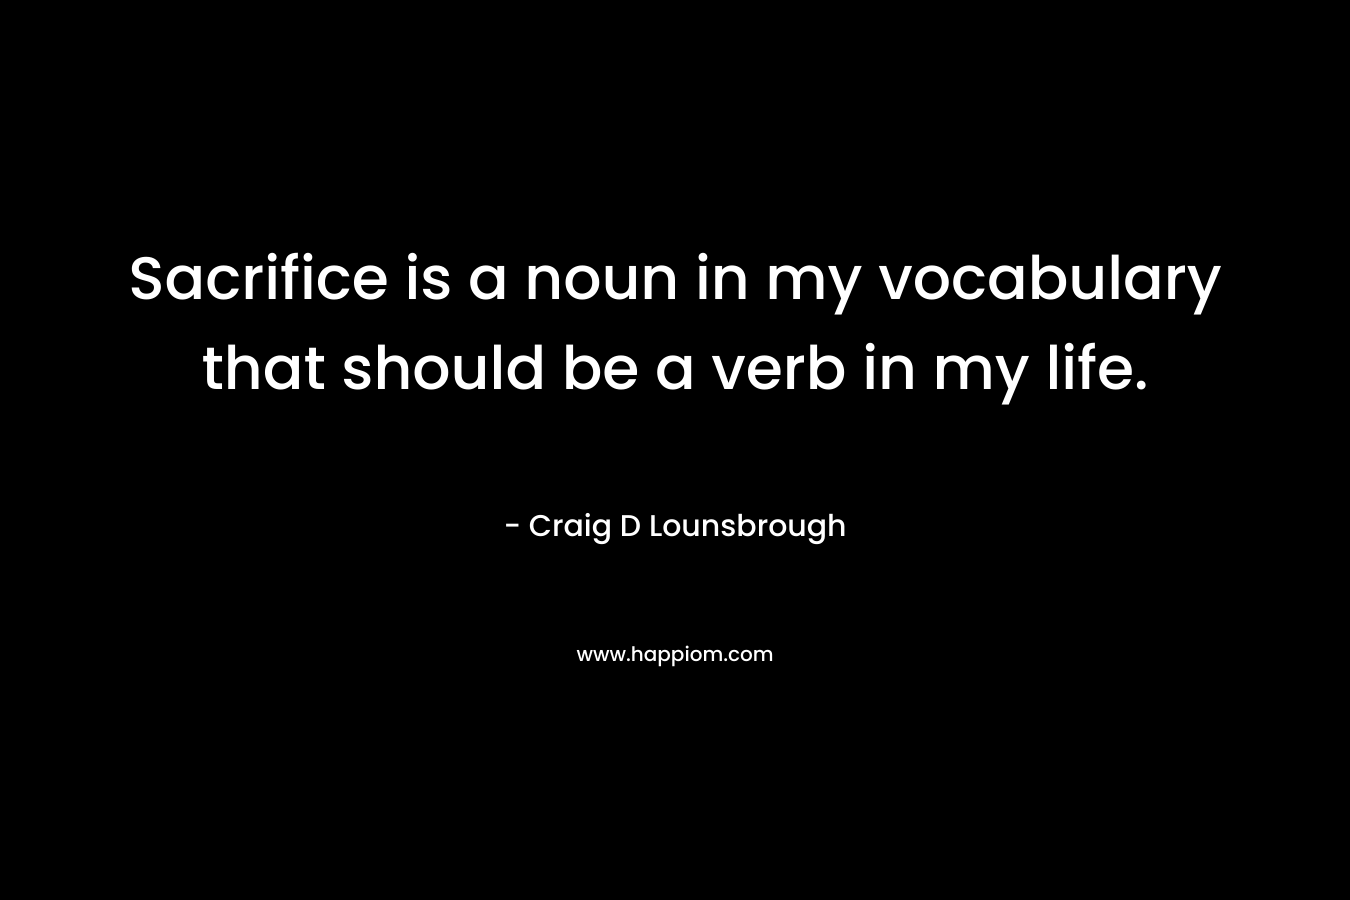 Sacrifice is a noun in my vocabulary that should be a verb in my life. – Craig D Lounsbrough